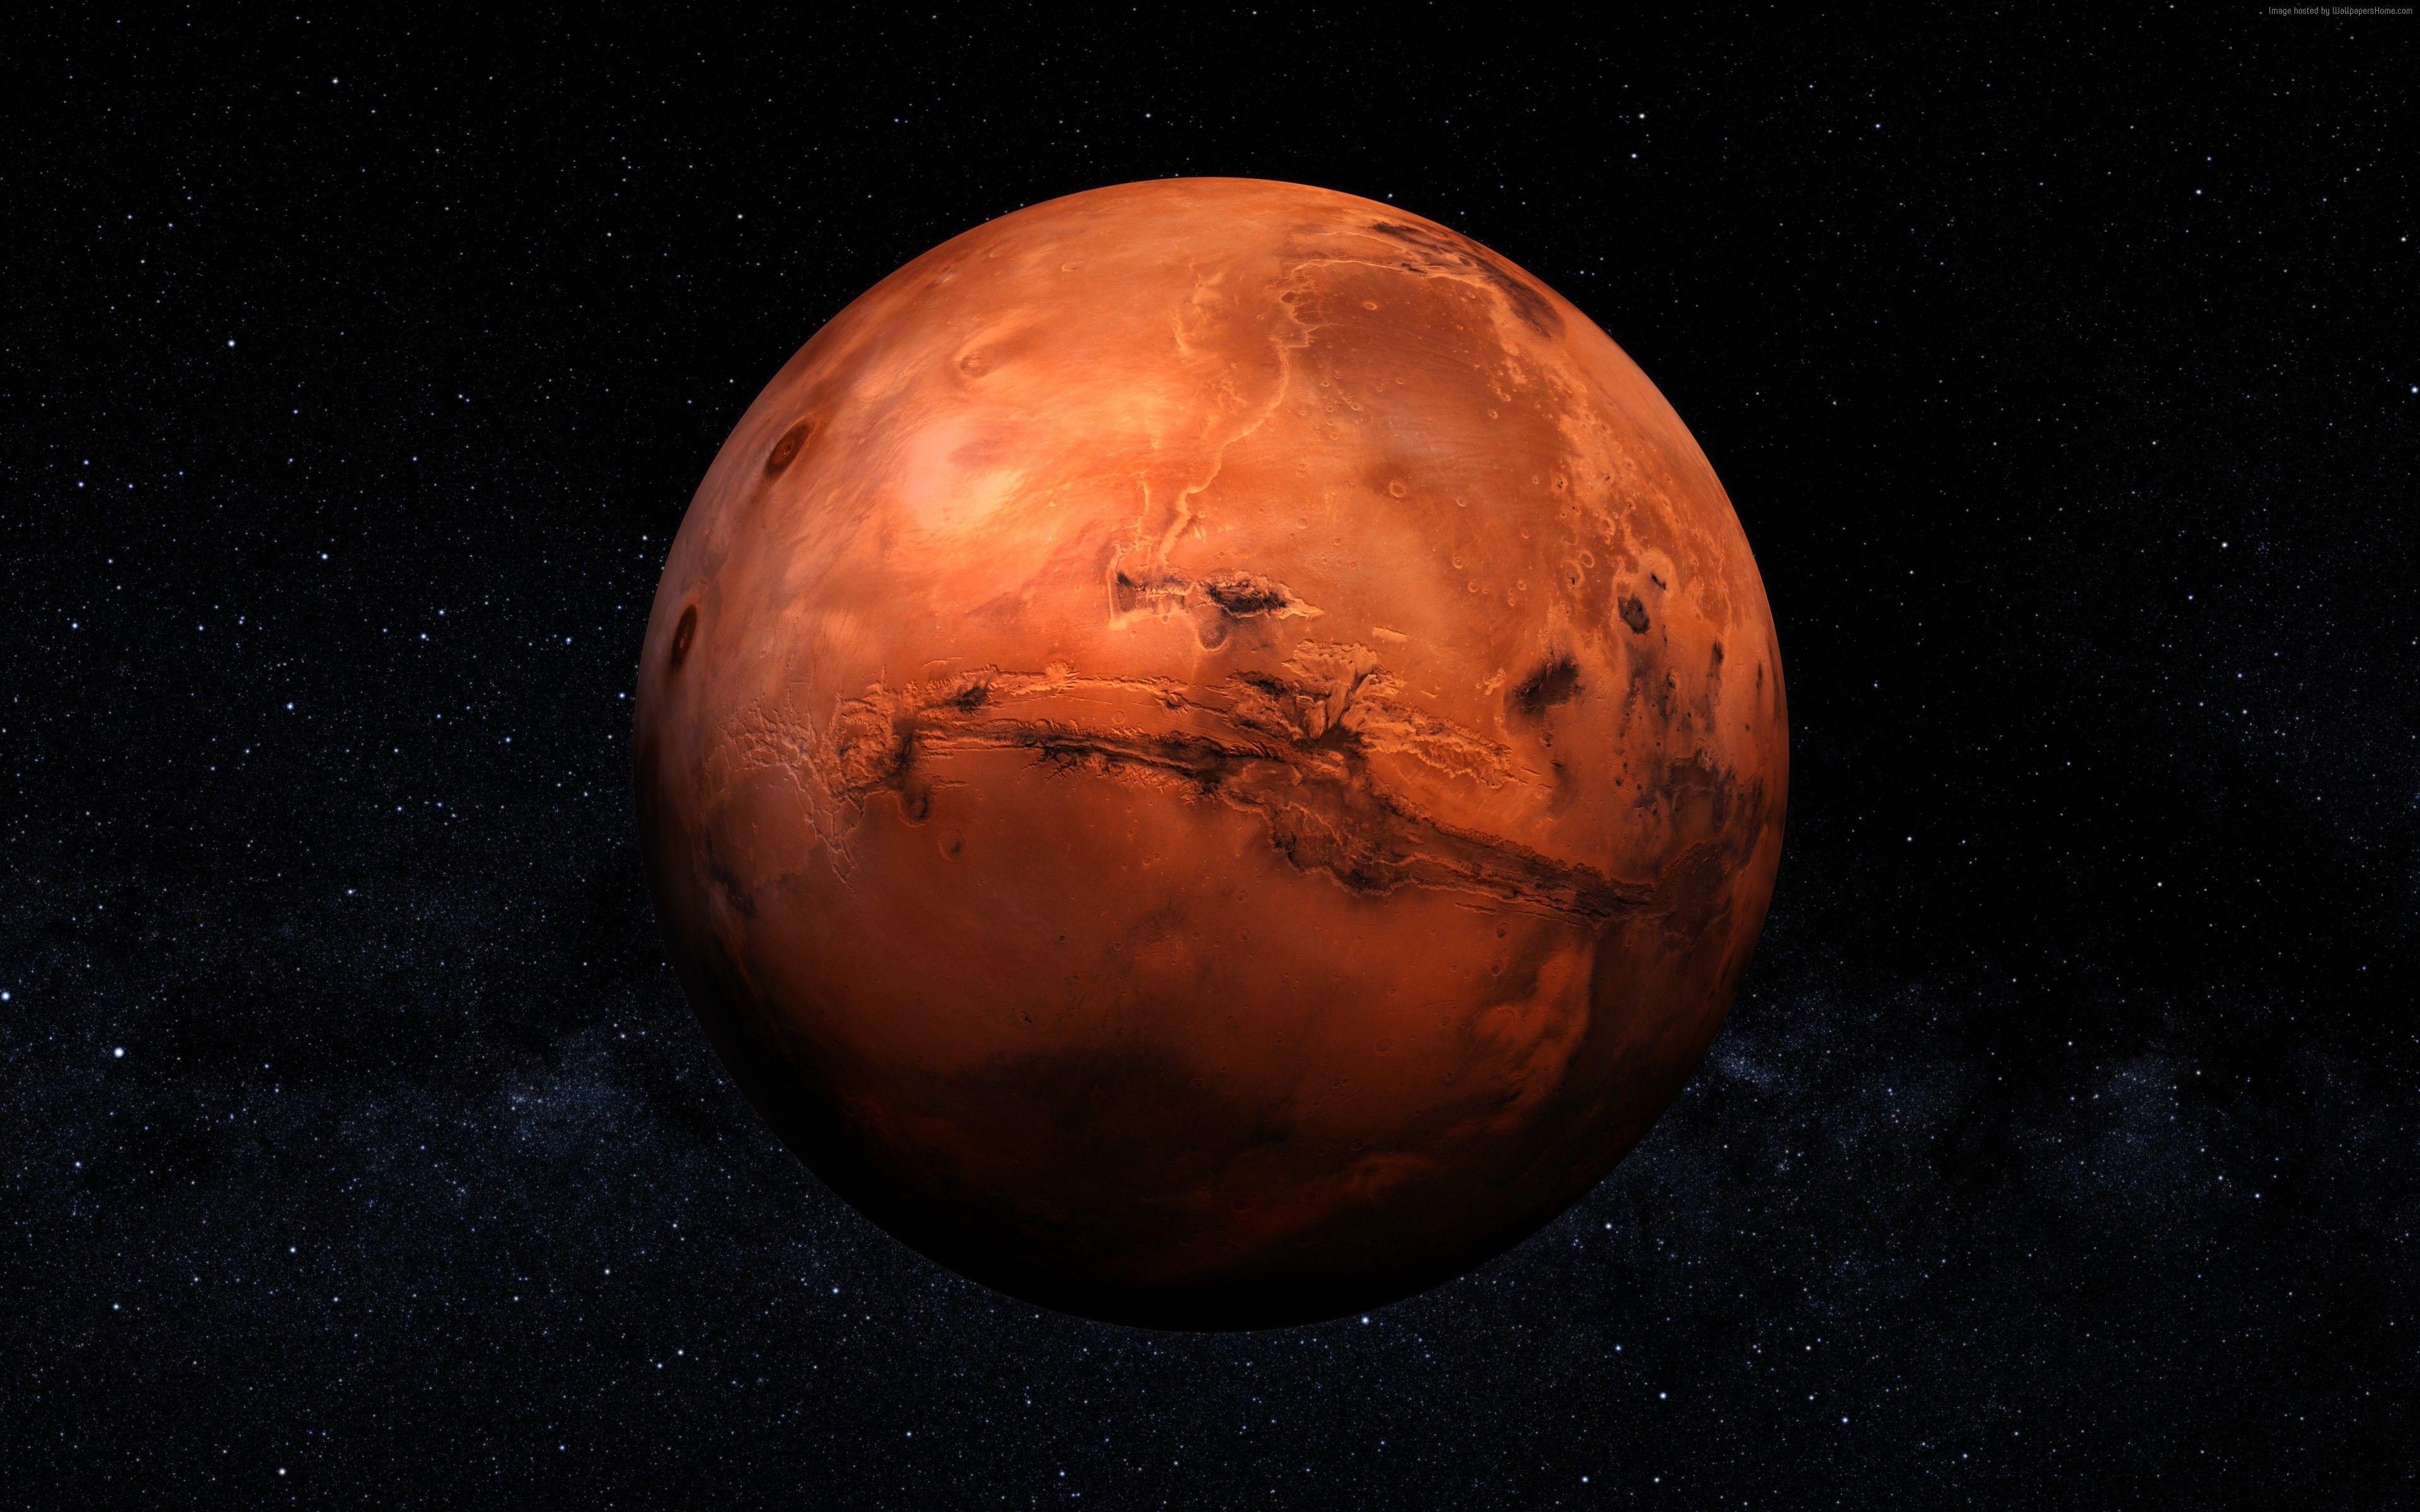 Planet Mars Wallpapers Top Free Planet Mars Backgrounds Wallpaperaccess